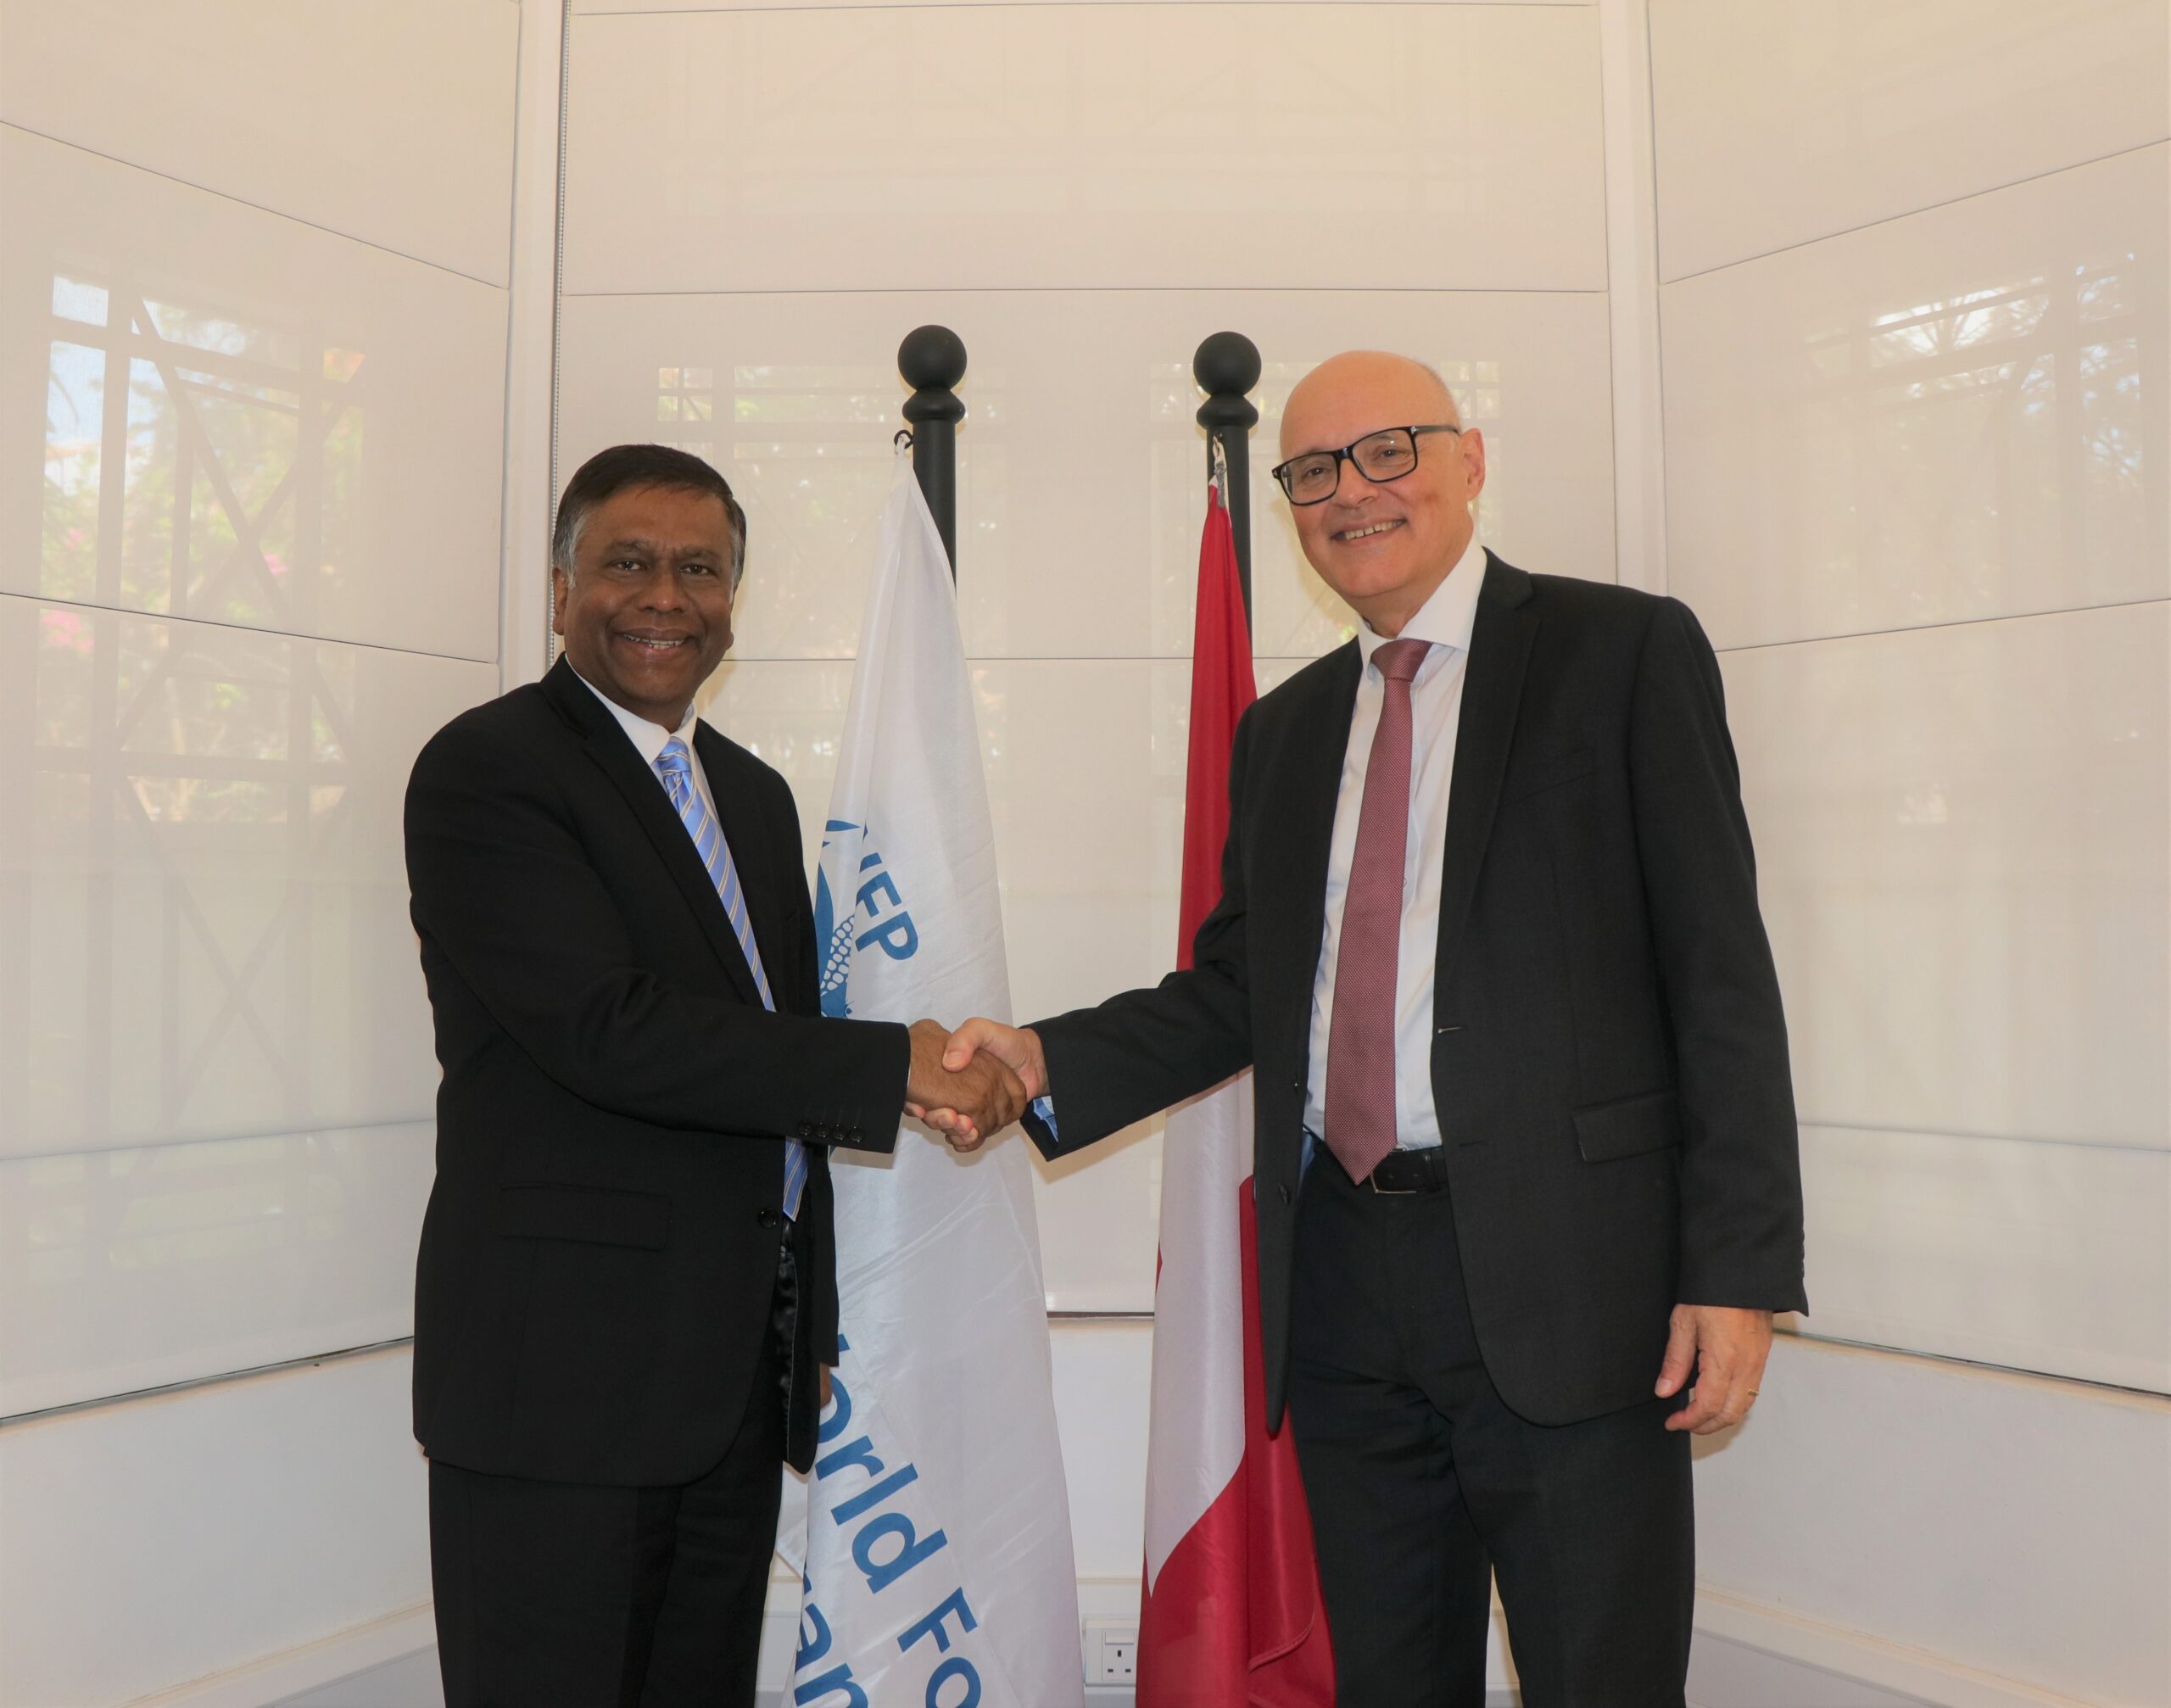 <strong>Switzerland provides funding to improve food security among communities affected by the economic crisis</strong>